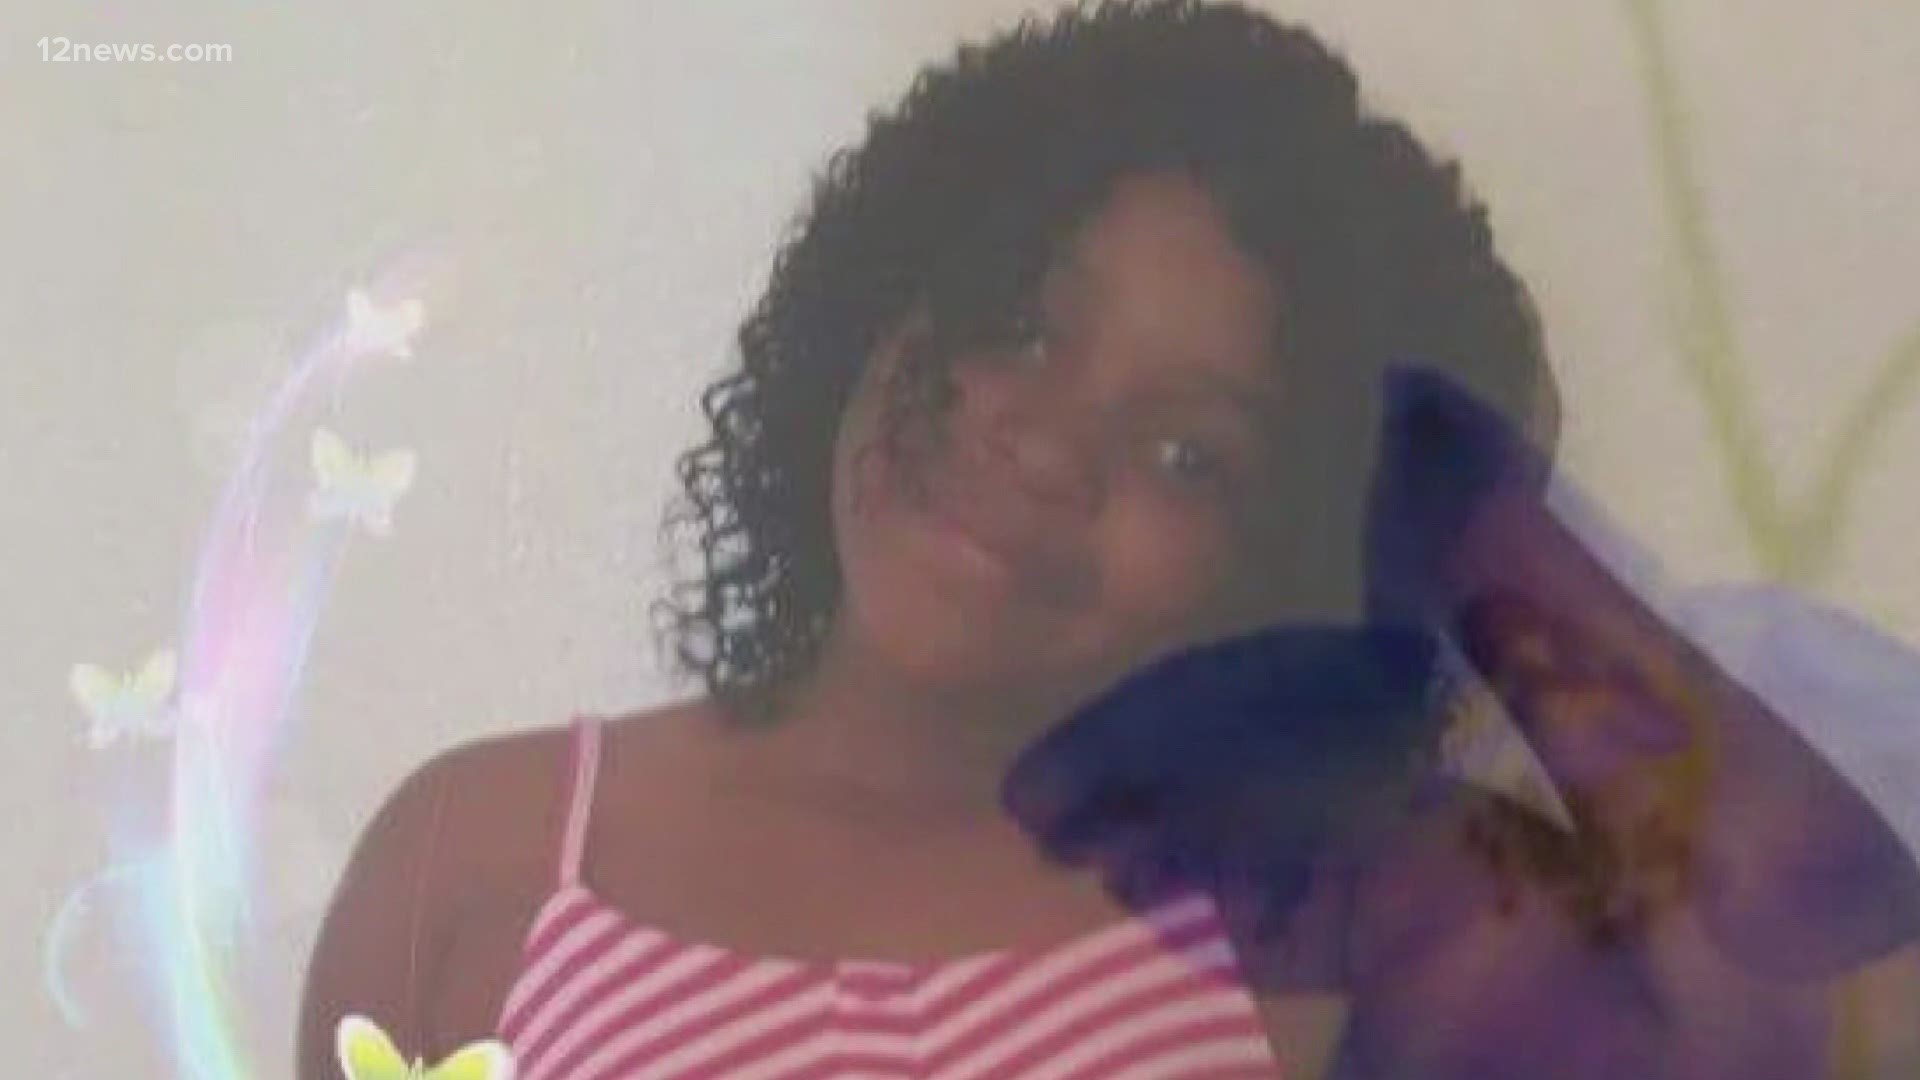 In May 2020, Anaiah Walker's body was found on the I-10 in Buckeye after she ran away from her group home.